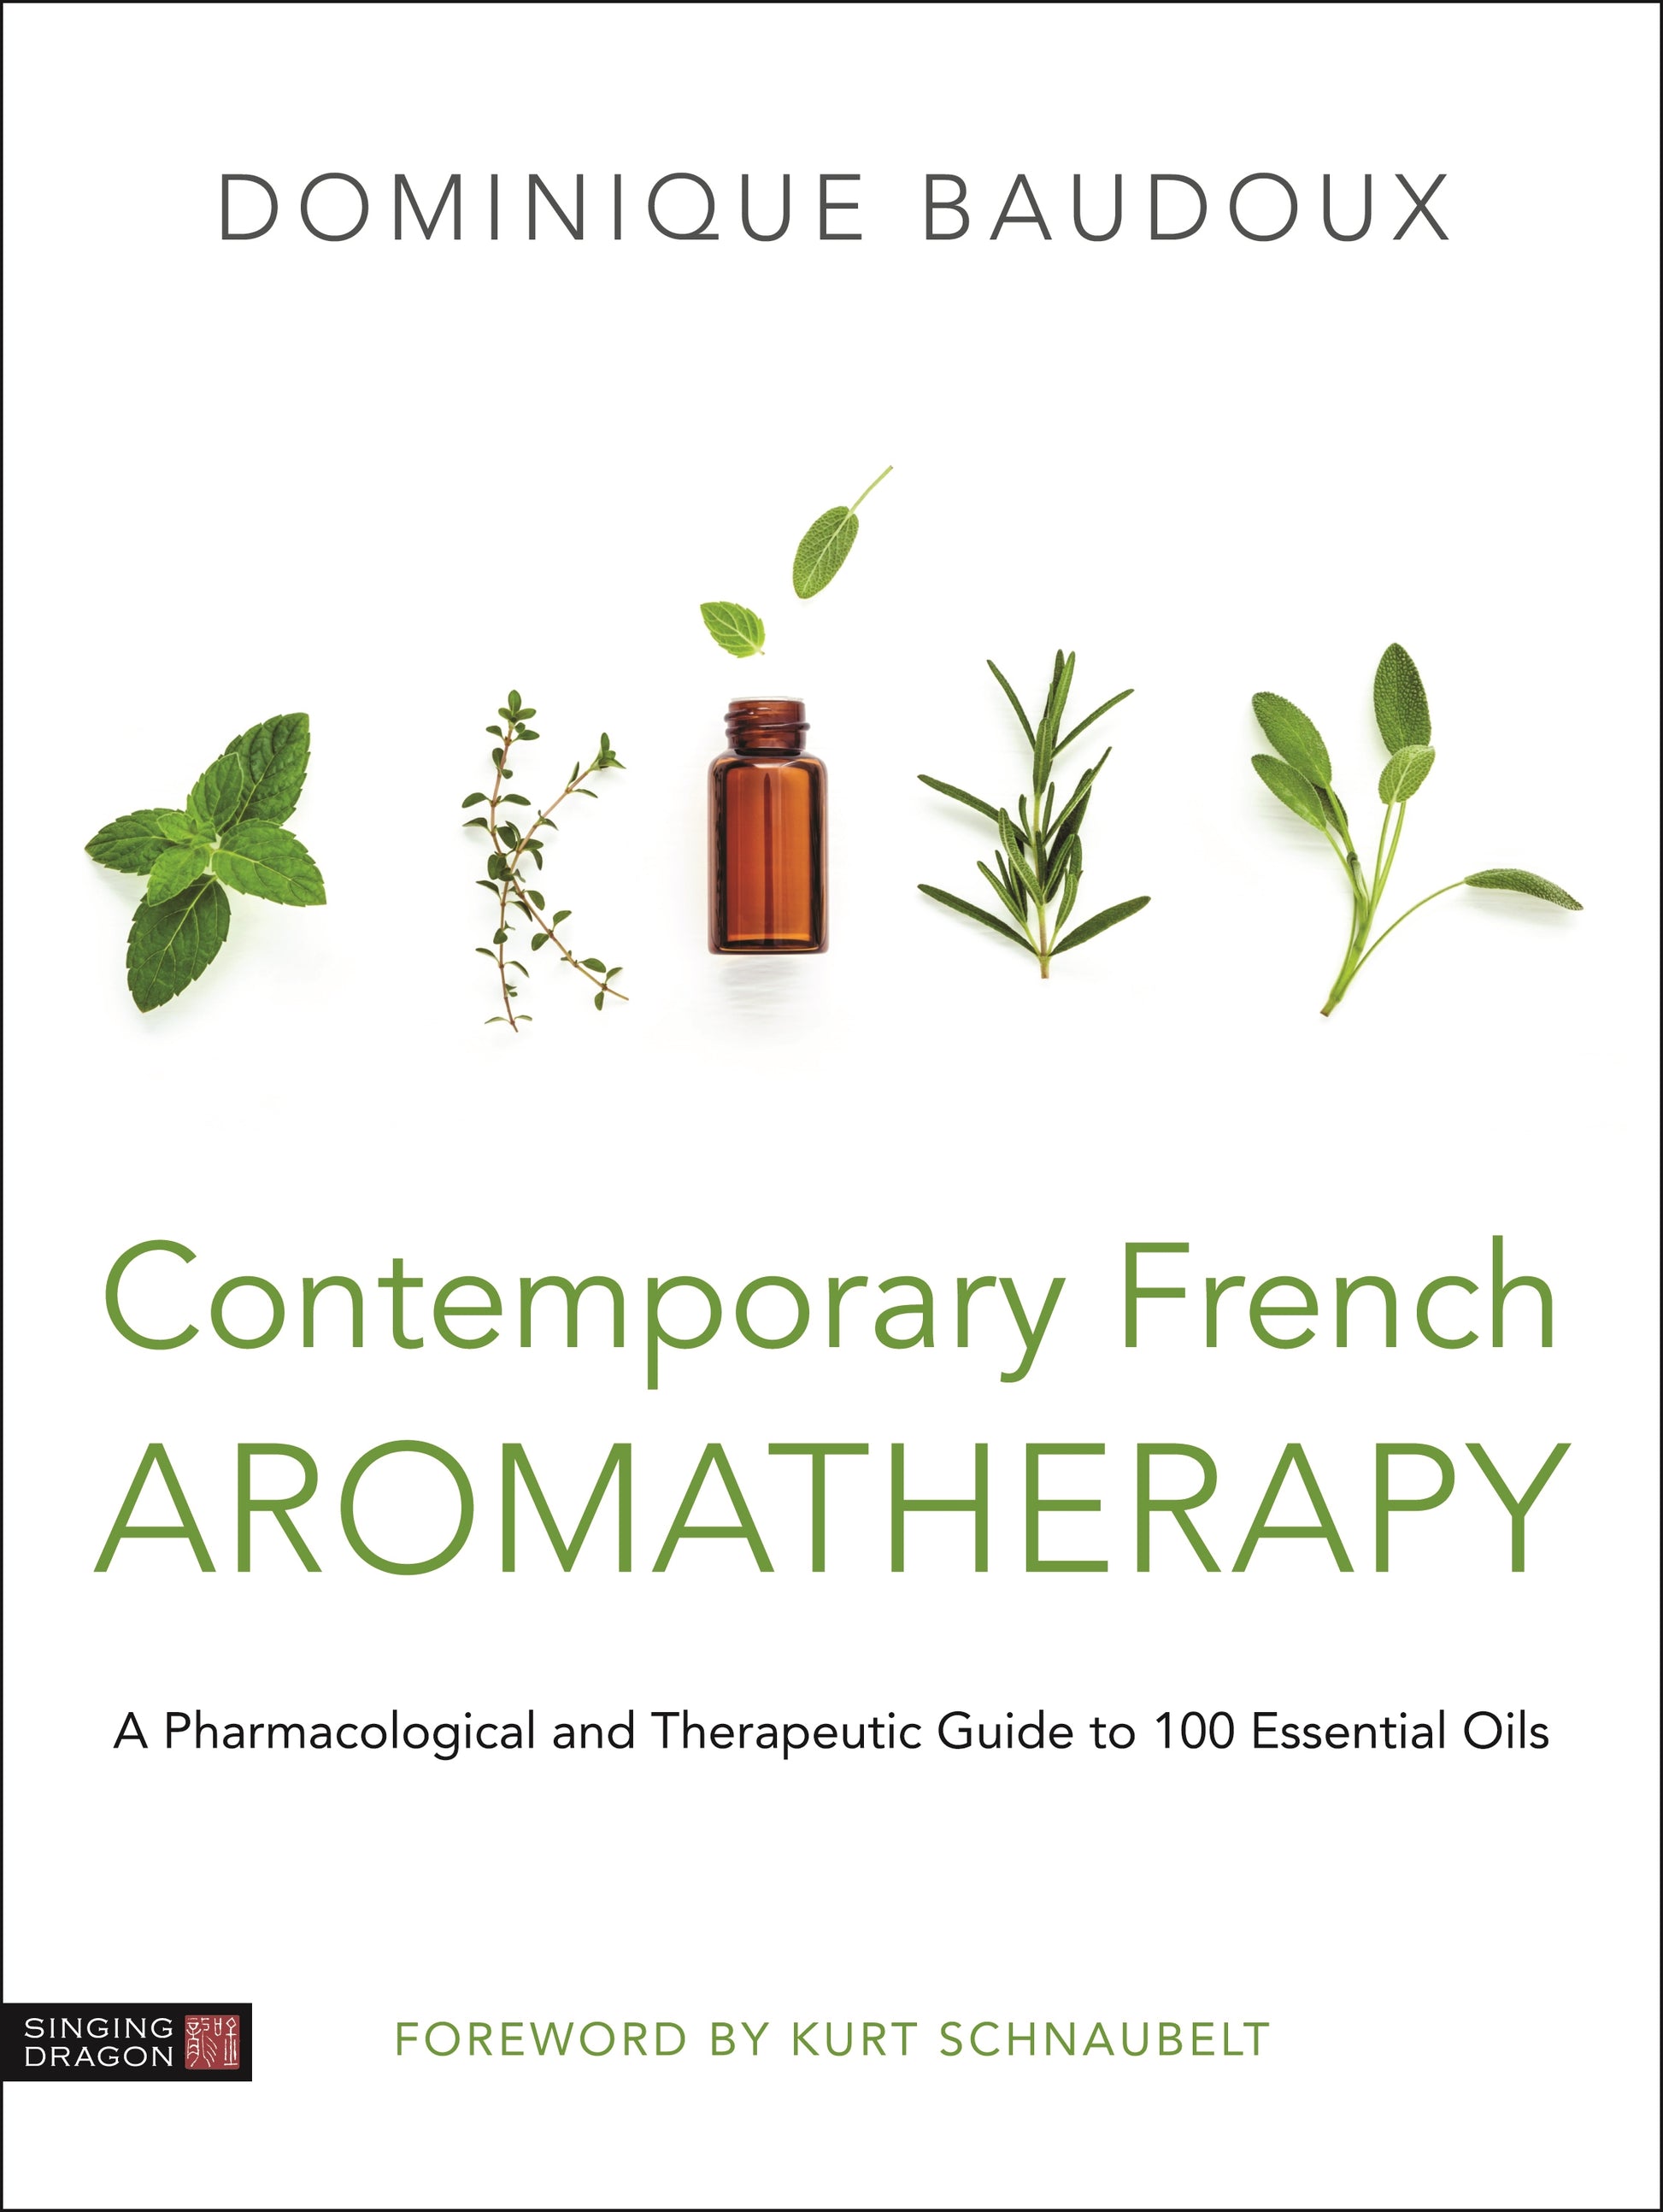 Contemporary French Aromatherapy by Dominique Baudoux, Kurt Schnaubelt